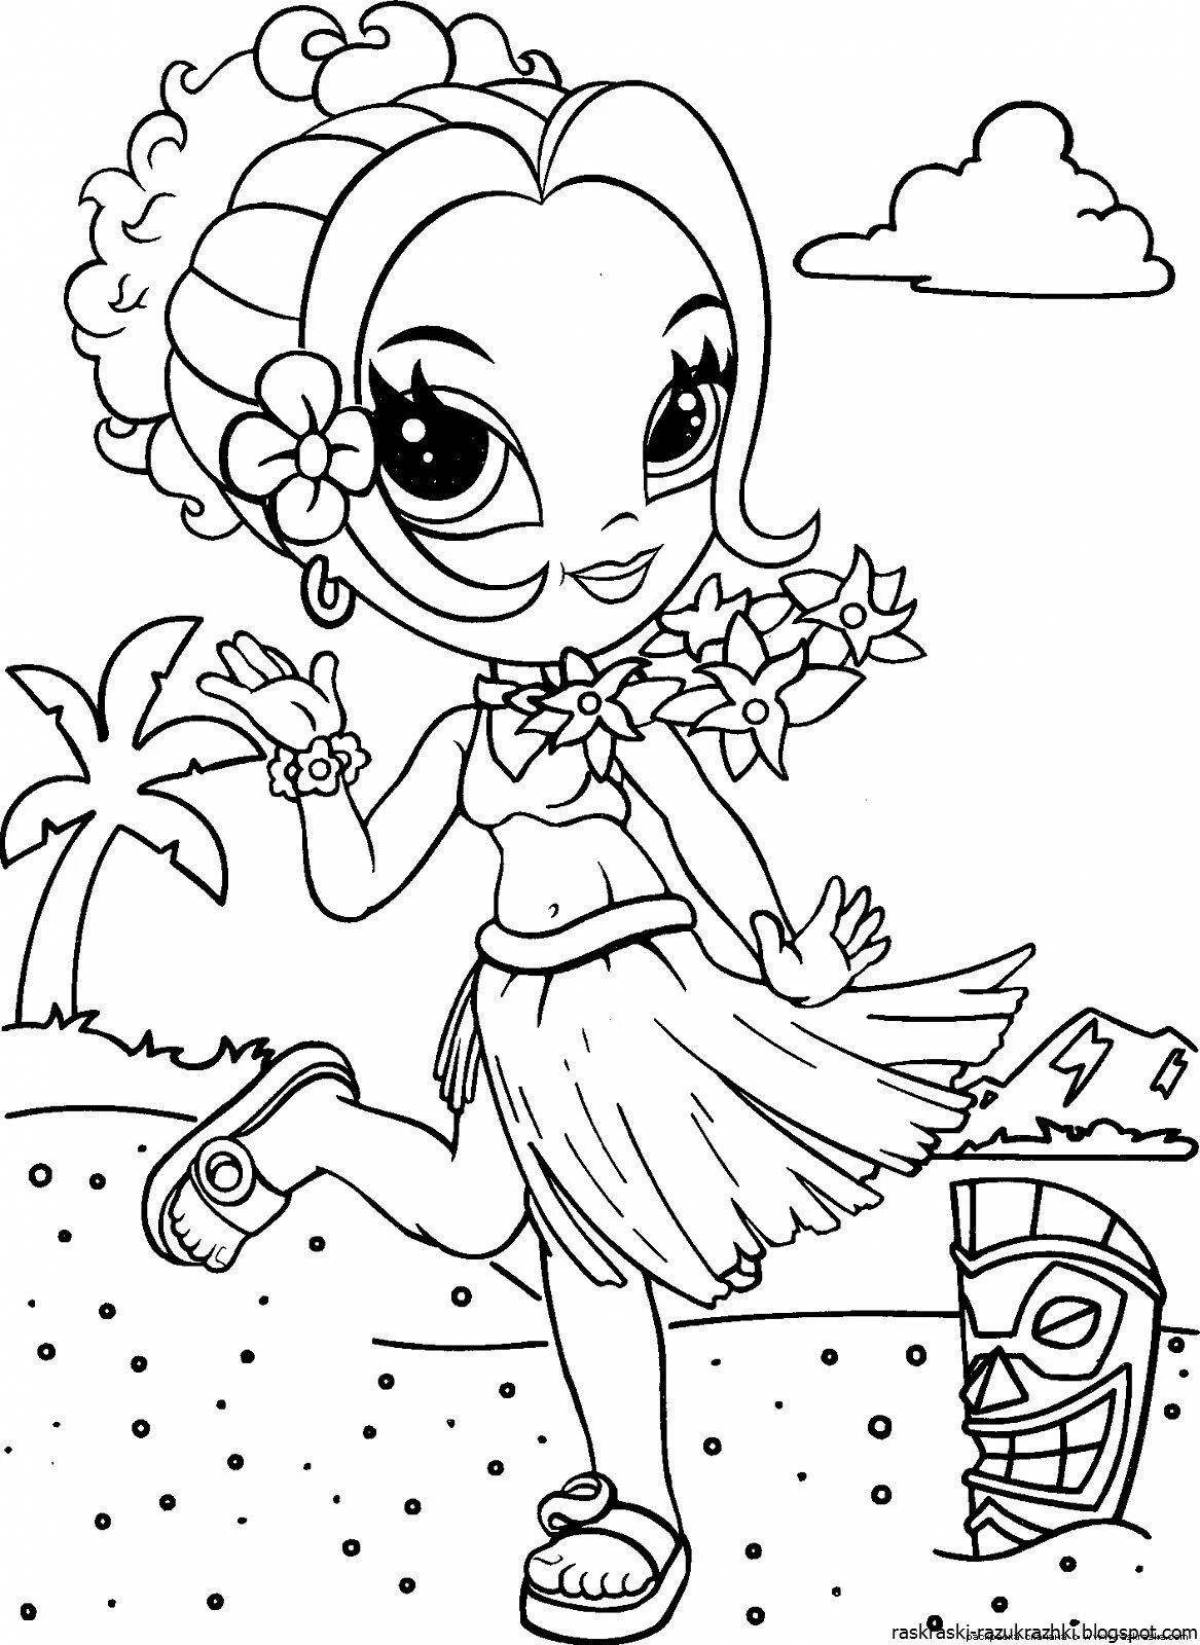 Great coloring book for 5 year old girls